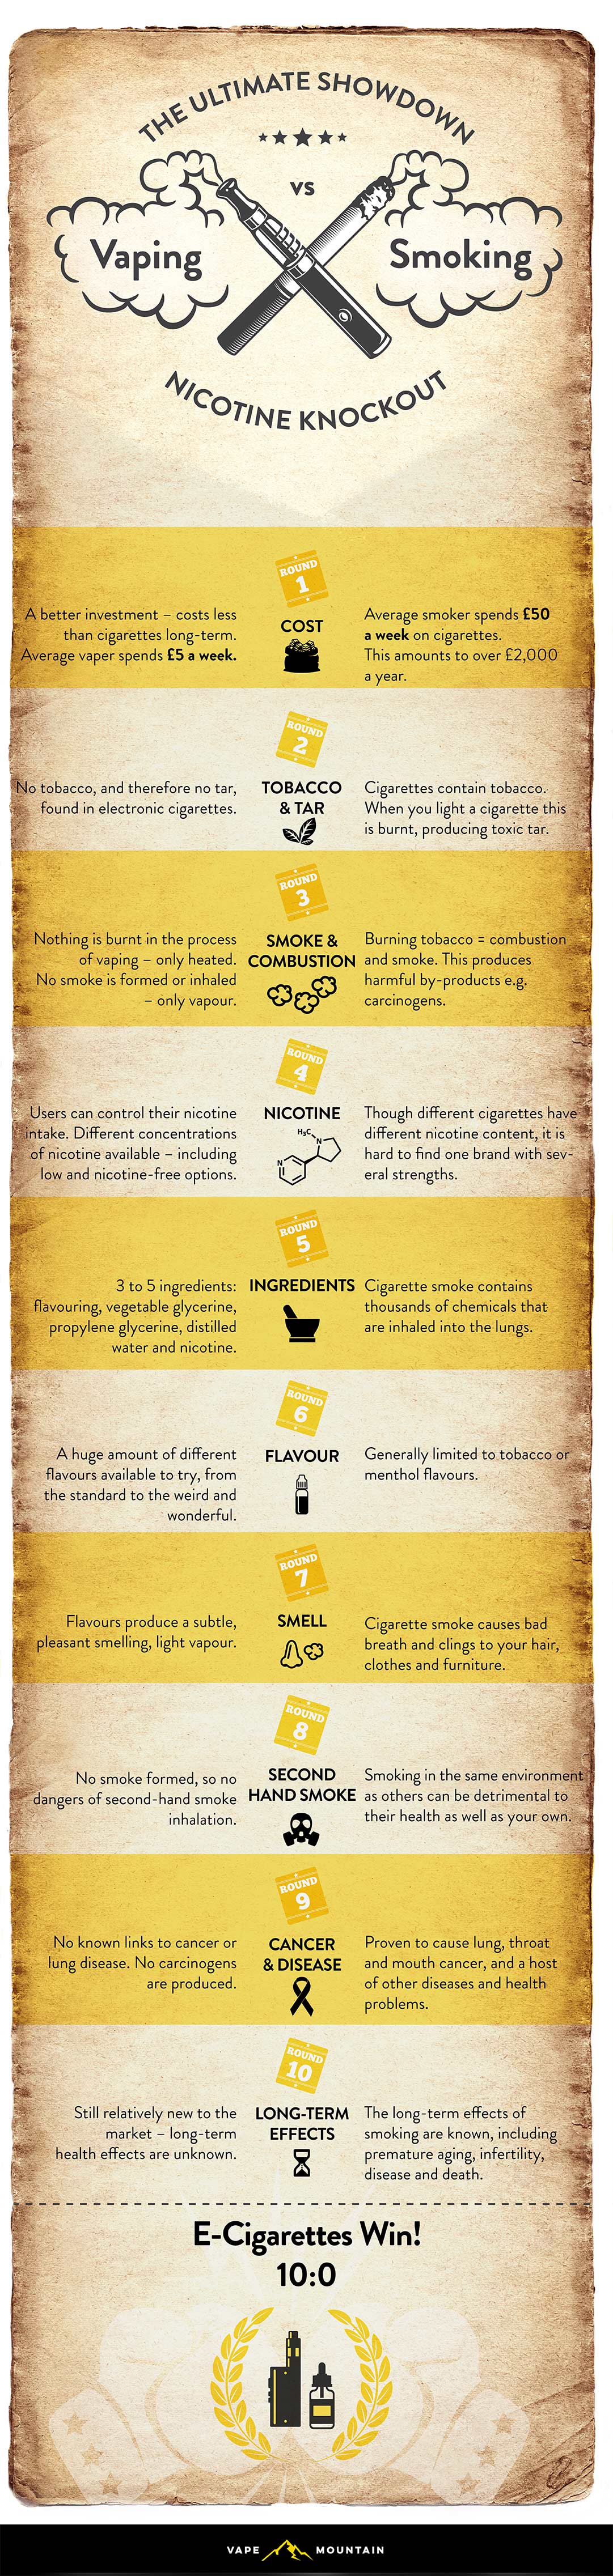 Learn About The Difference Between Vaping and Smoking